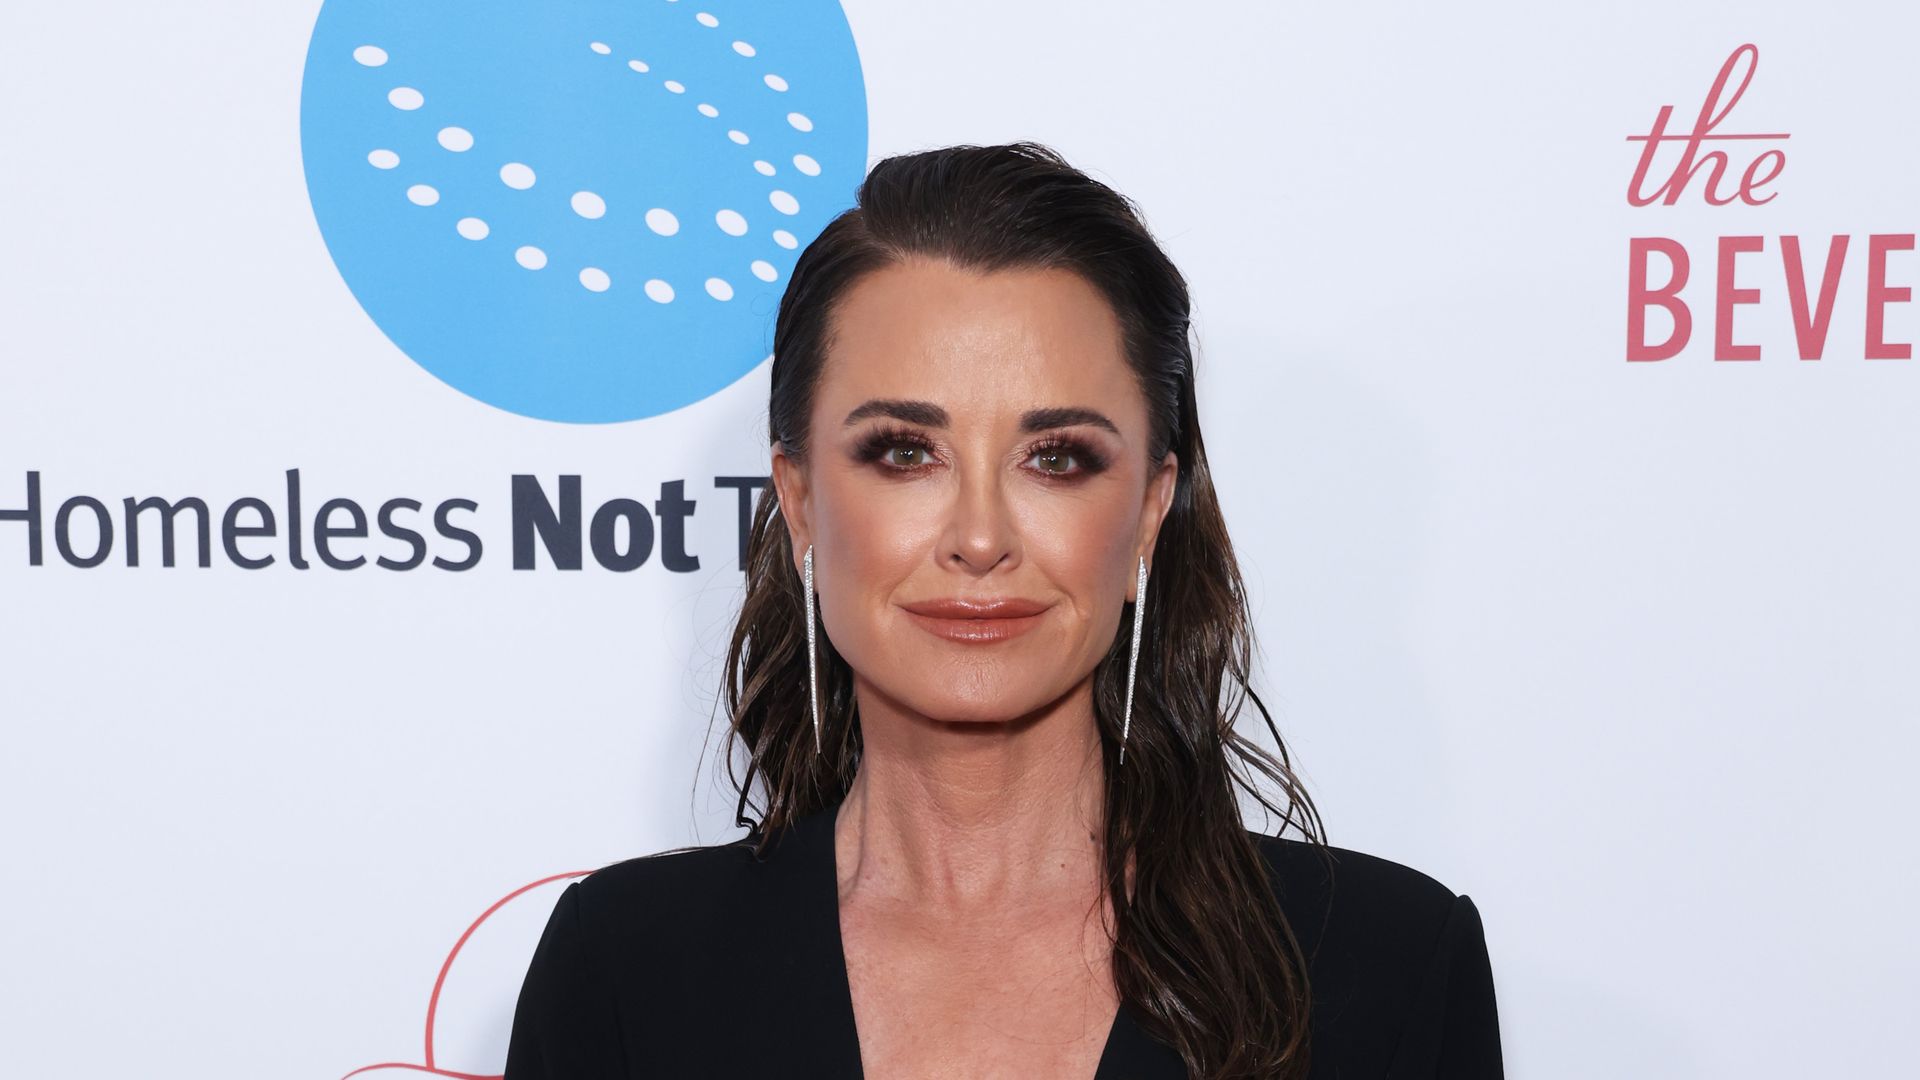 RHOBH's Kyle Richards thinks it's 'funny' Rihanna thought Kyle and Morgan Wade were a couple